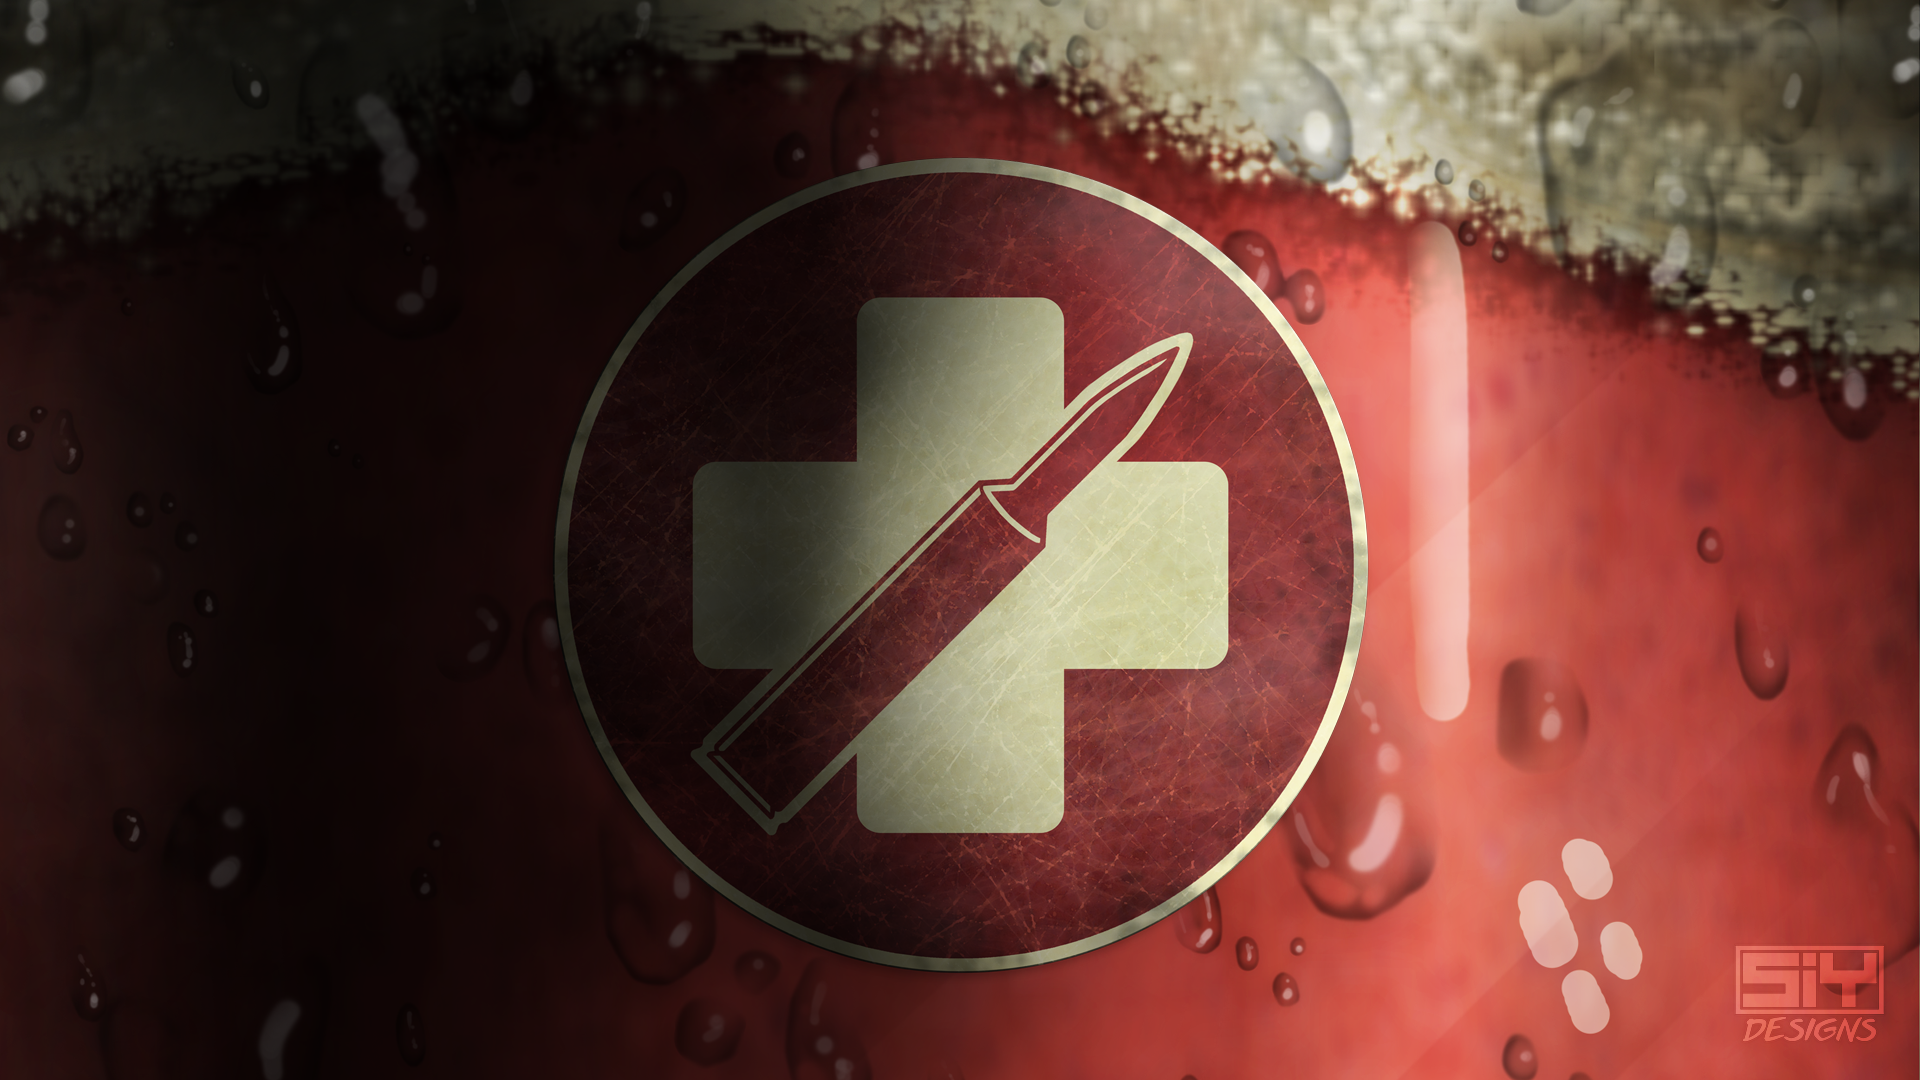 As I Promised Here Is The Juggernog Wallpaper Thanks To